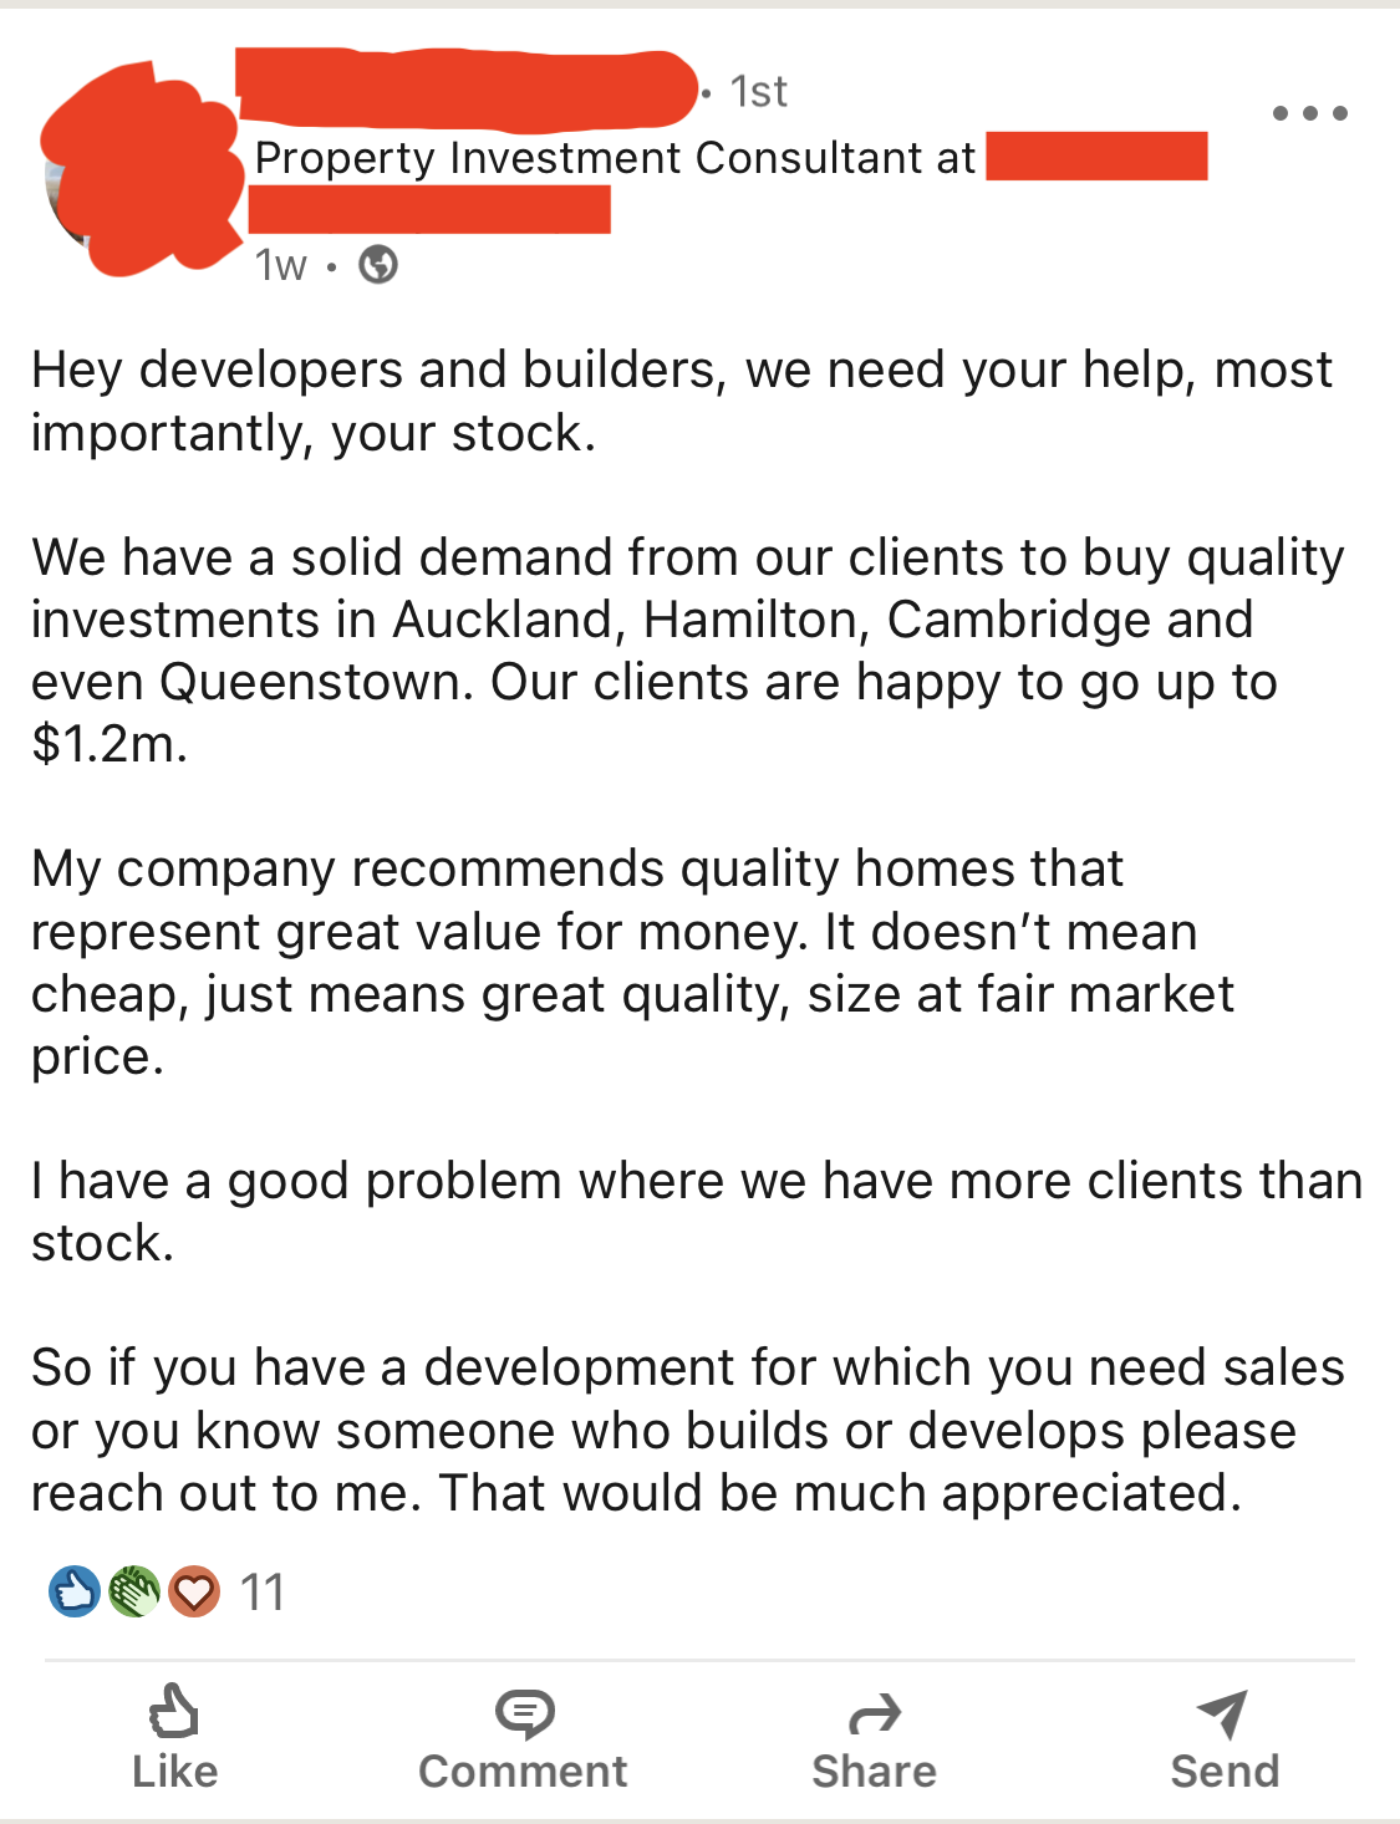 Example of a Biased Property Coach